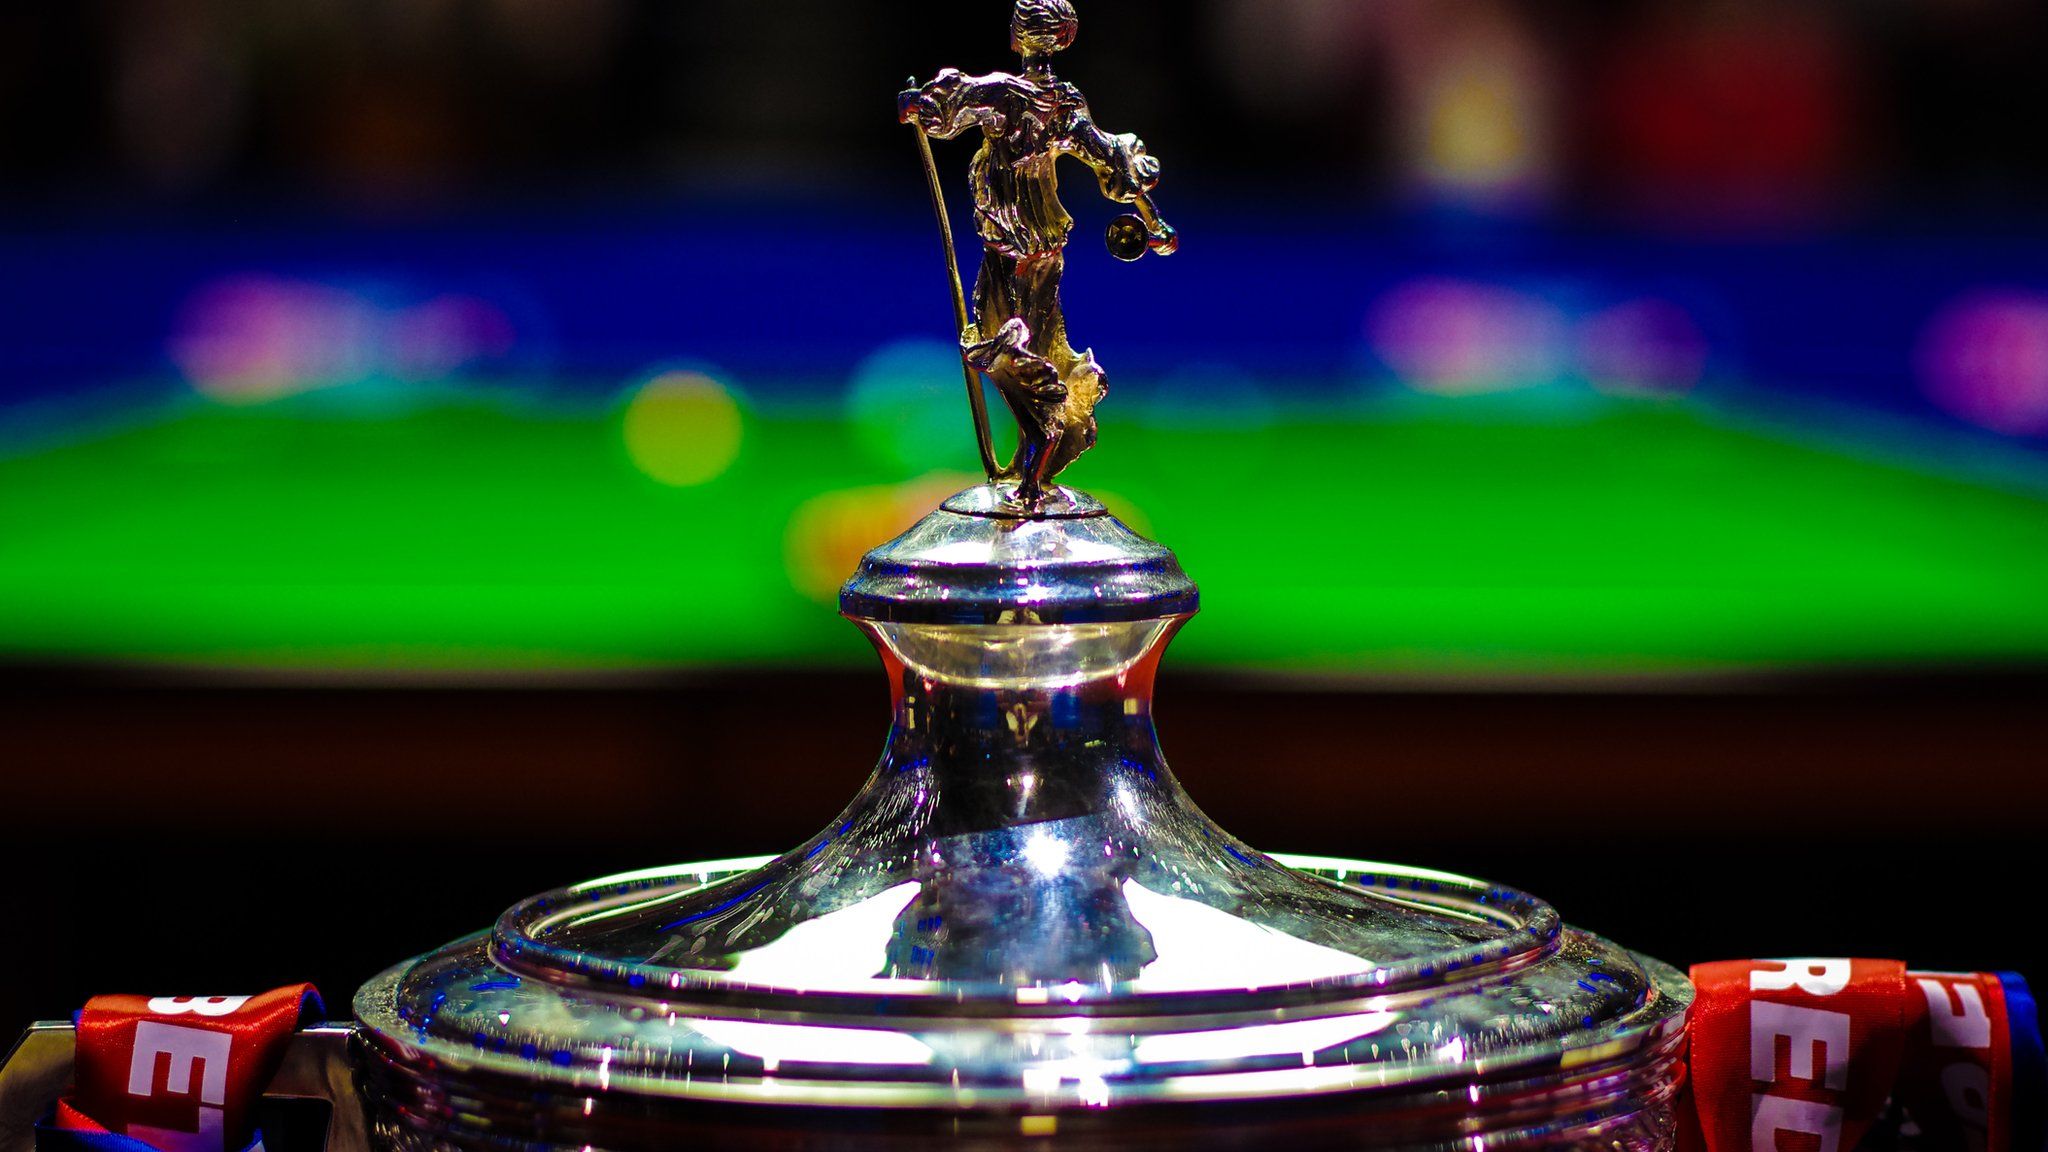 The World Snooker Championship trophy